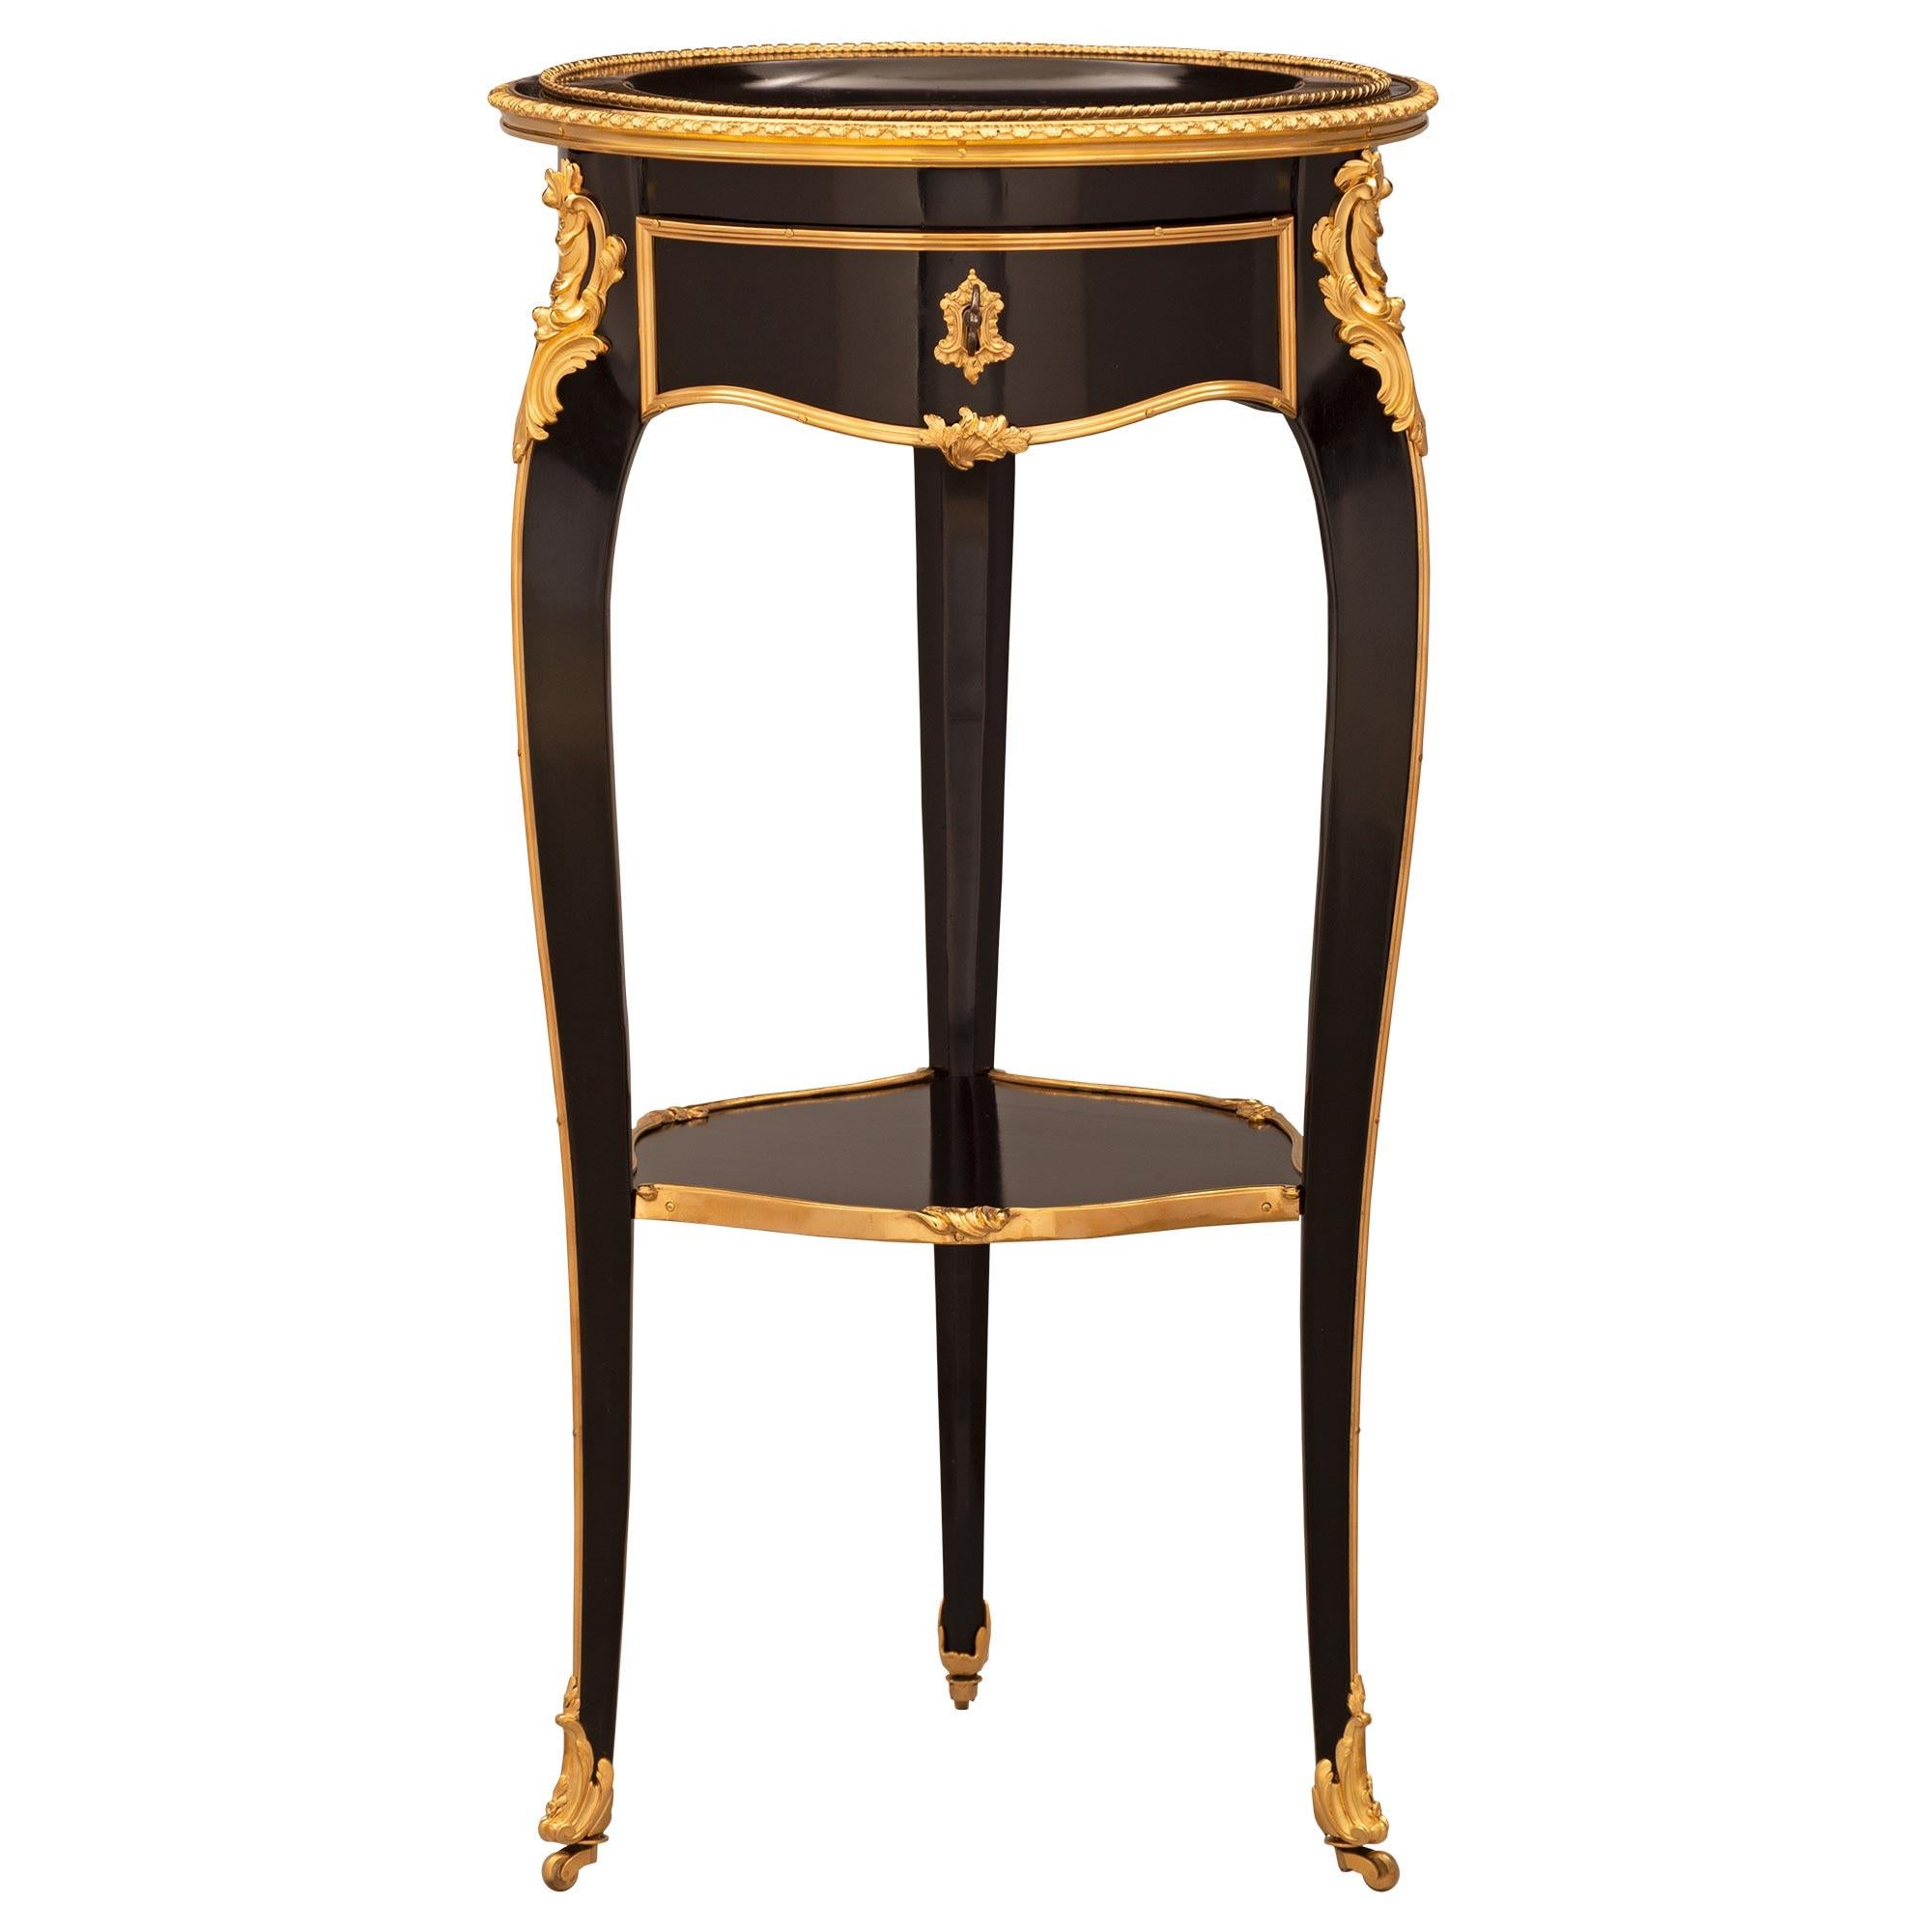 French 19th Century Napoleon III Period Japanese Black Lacquer Side Table